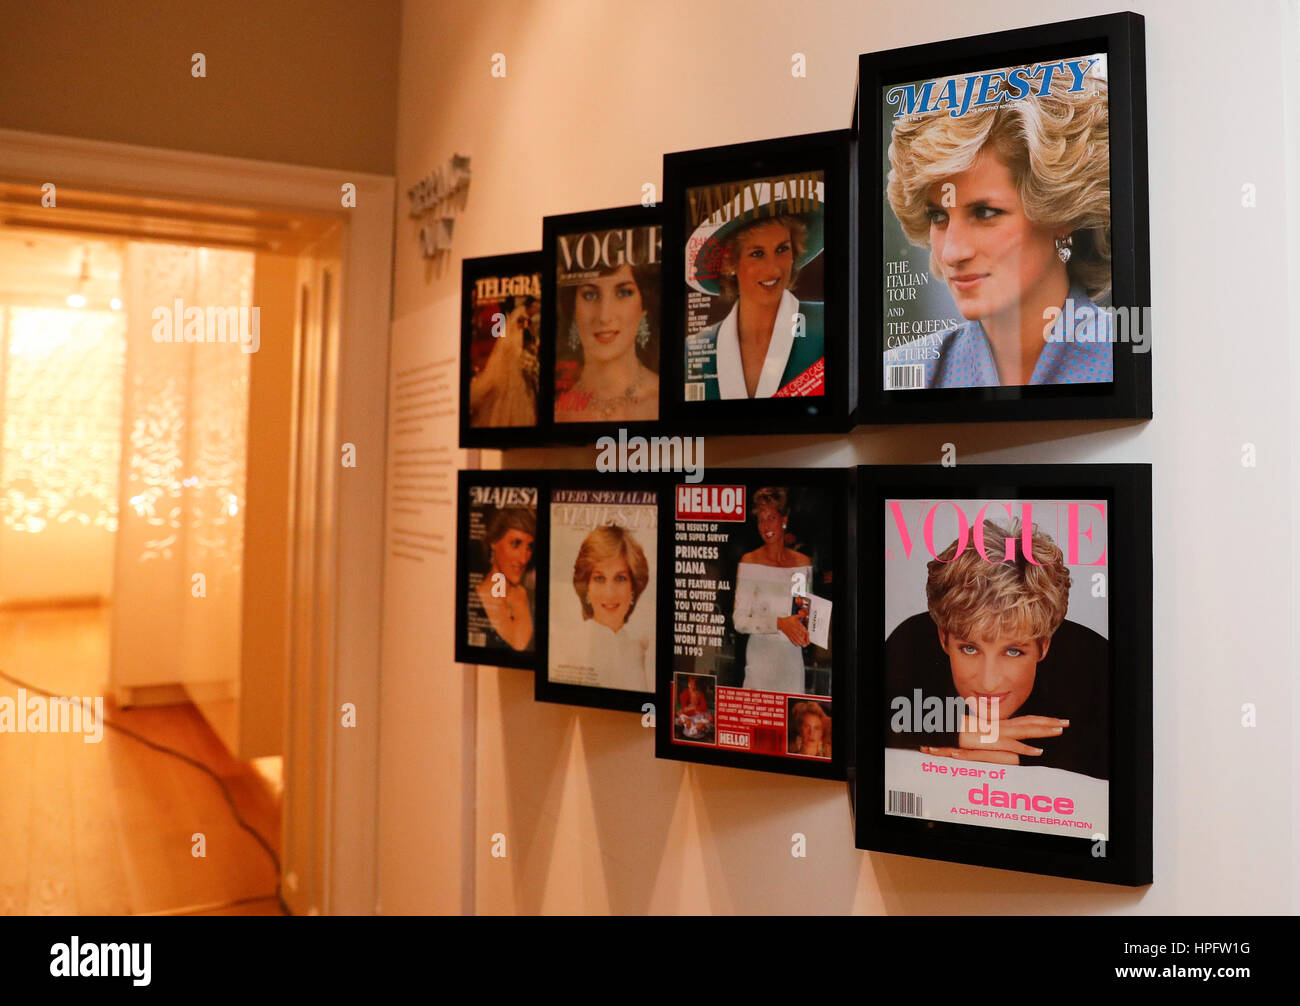 London, UK. 22nd Feb, 2017. London, Princess' dresses and outfits. 31st Aug, 1997. A selection of magazine front pages featuring Princess Diana is shown at 'Diana: Her Fashion Story' Exhibition at the Kensington Palace in London, Britain, on Feb. 22, 2017. The exhibition 'Diana: Her Fashion Story', which showcases a number of the Princess' dresses and outfits, will open to the public on February 24 as part of the events commemorating the life of Princess Diana to mark the 20th anniversary of her death in Paris on August 31, 1997. Credit: Xinhua/Alamy Live News Stock Photo